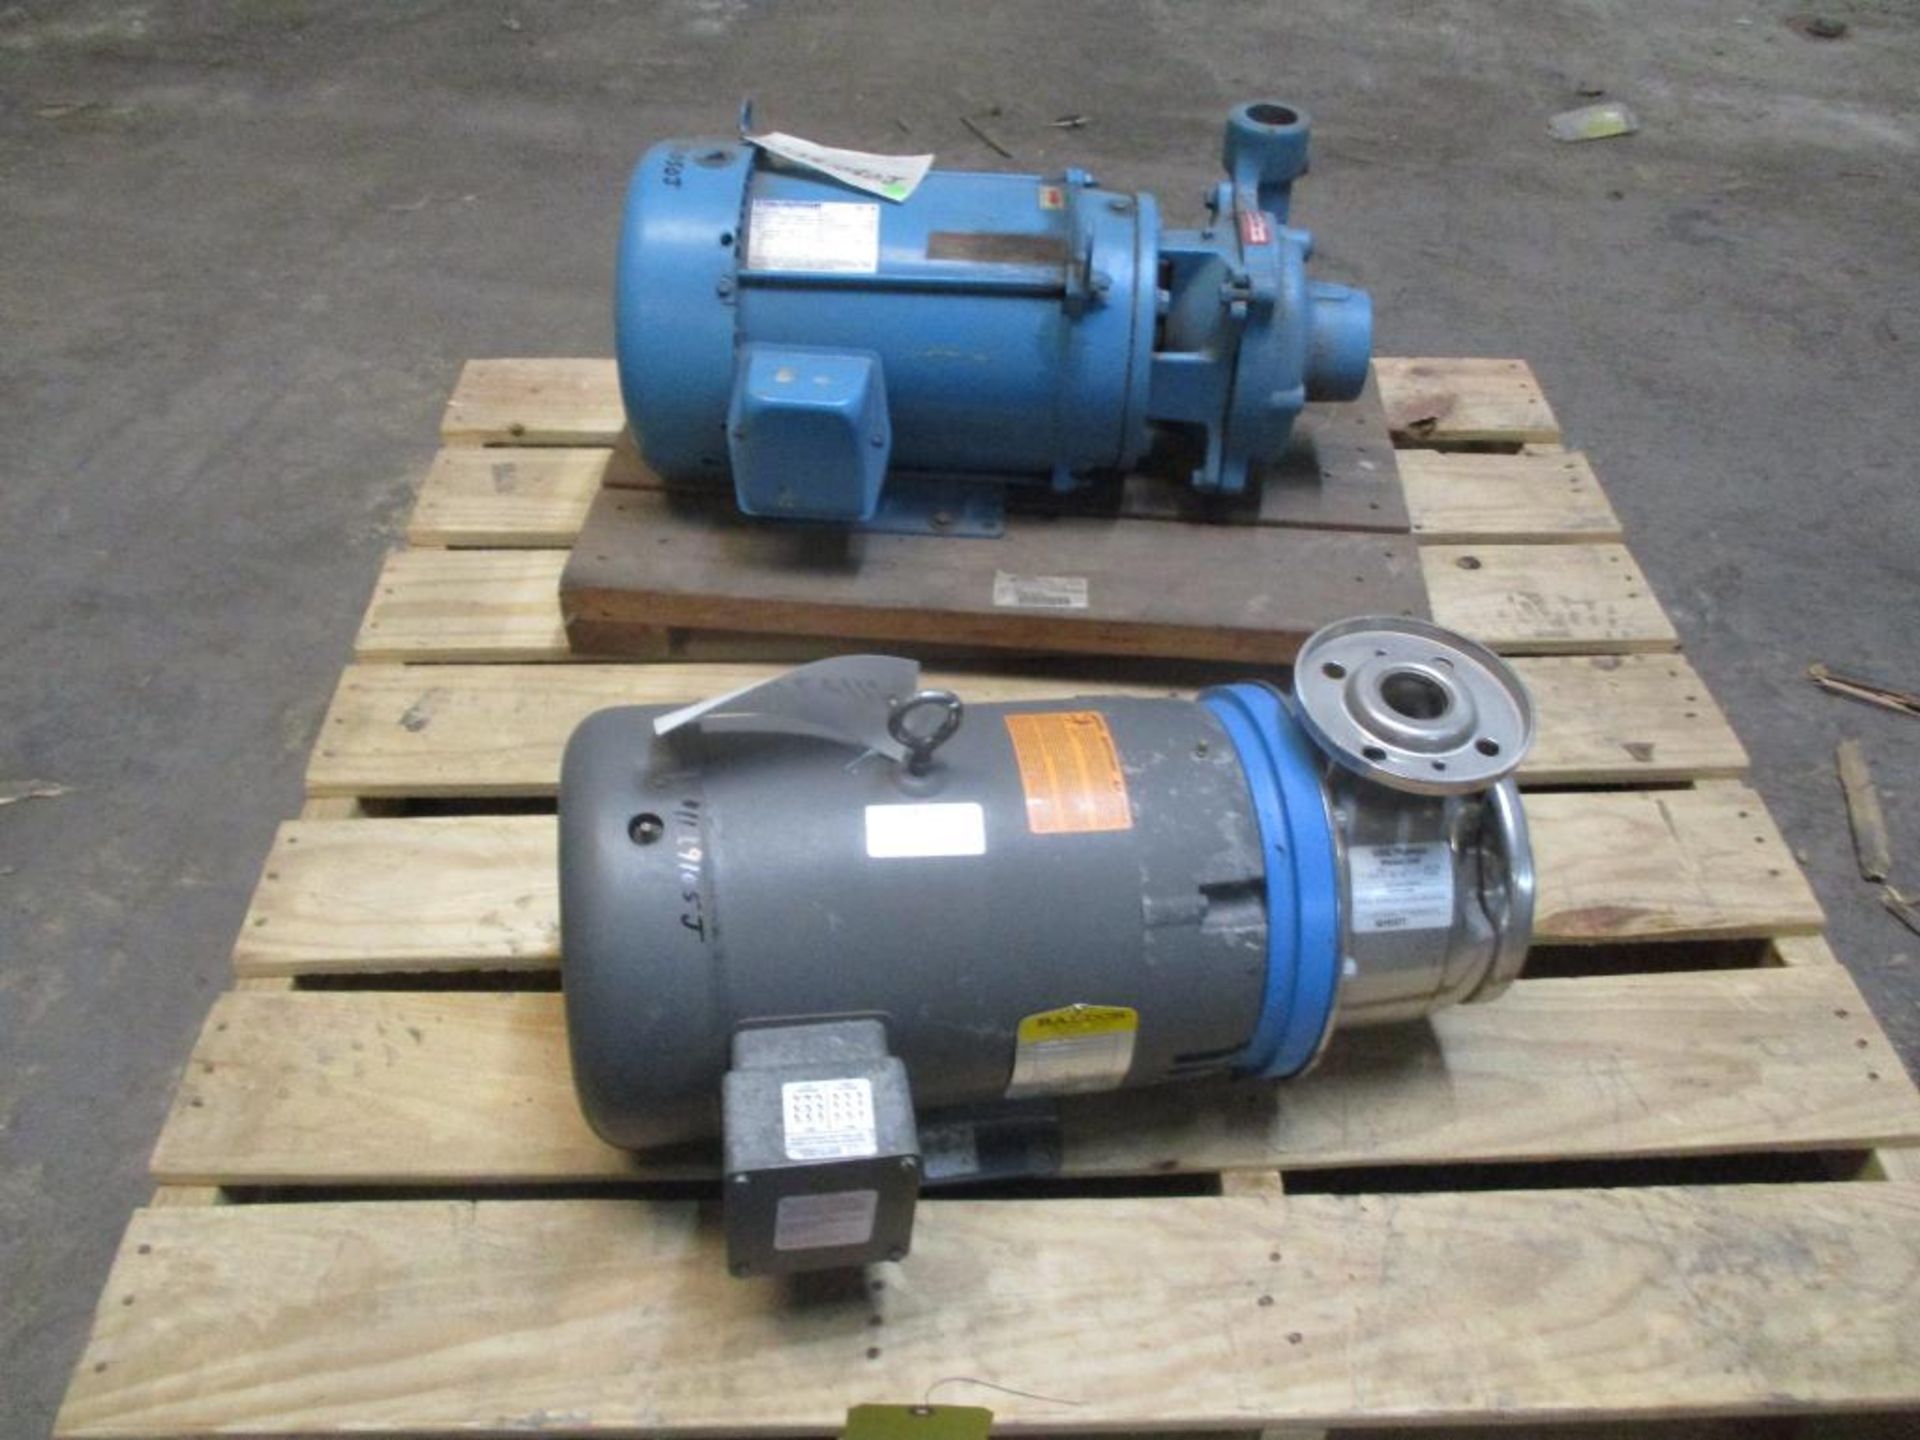 Goulds G&L 1-1/2 x 2-1/2-6 Stainless 10 HP Pump, Mepco 1-1/2 x 2 Iron 7-1/2 HP Pump (New) - Image 3 of 4